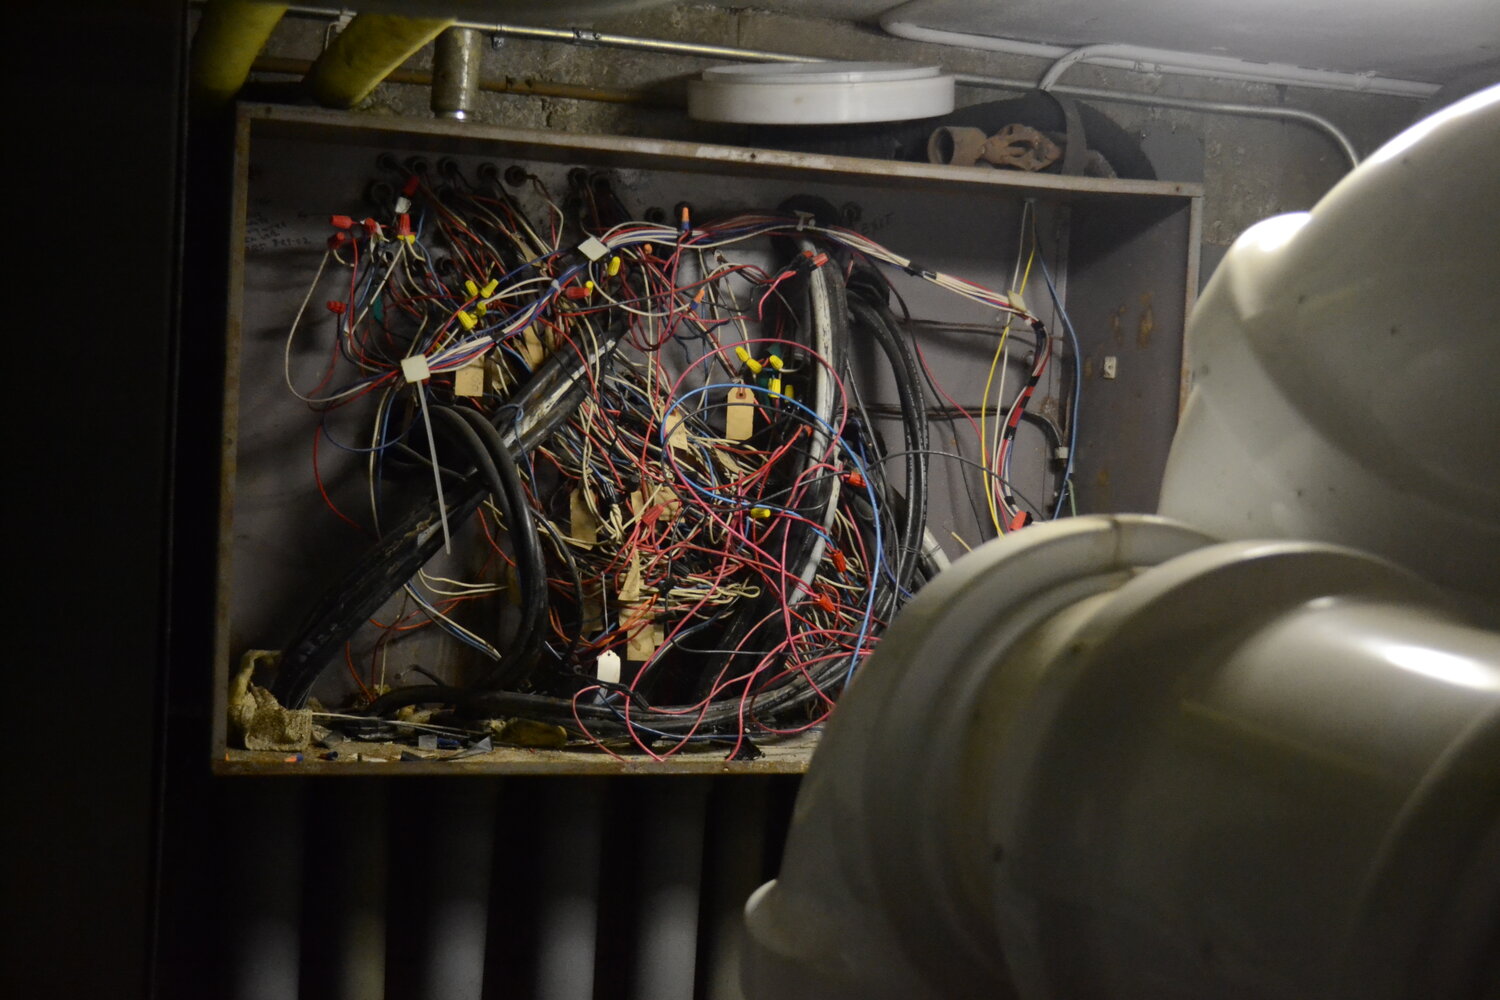 A mess of wires sits exposed in a side room off from the main boiler room. The panel is active, according to school personnel.